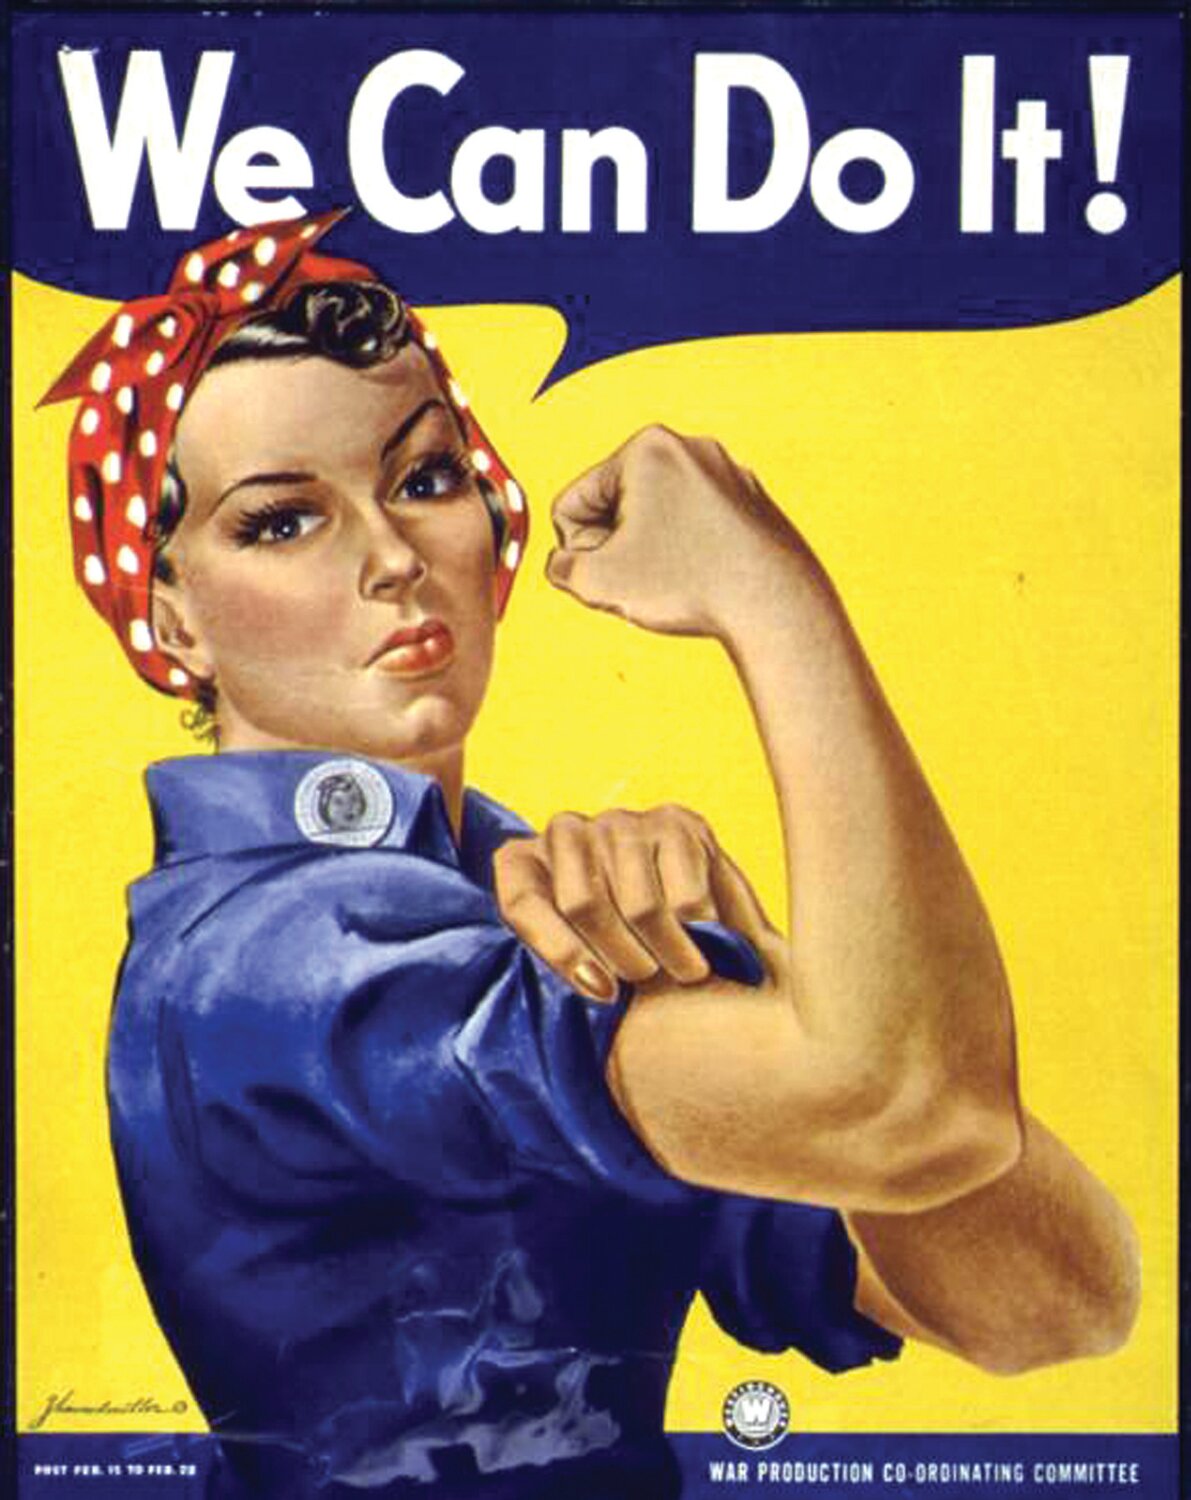 The “We Can Do It!” poster by J. Howard Miller.